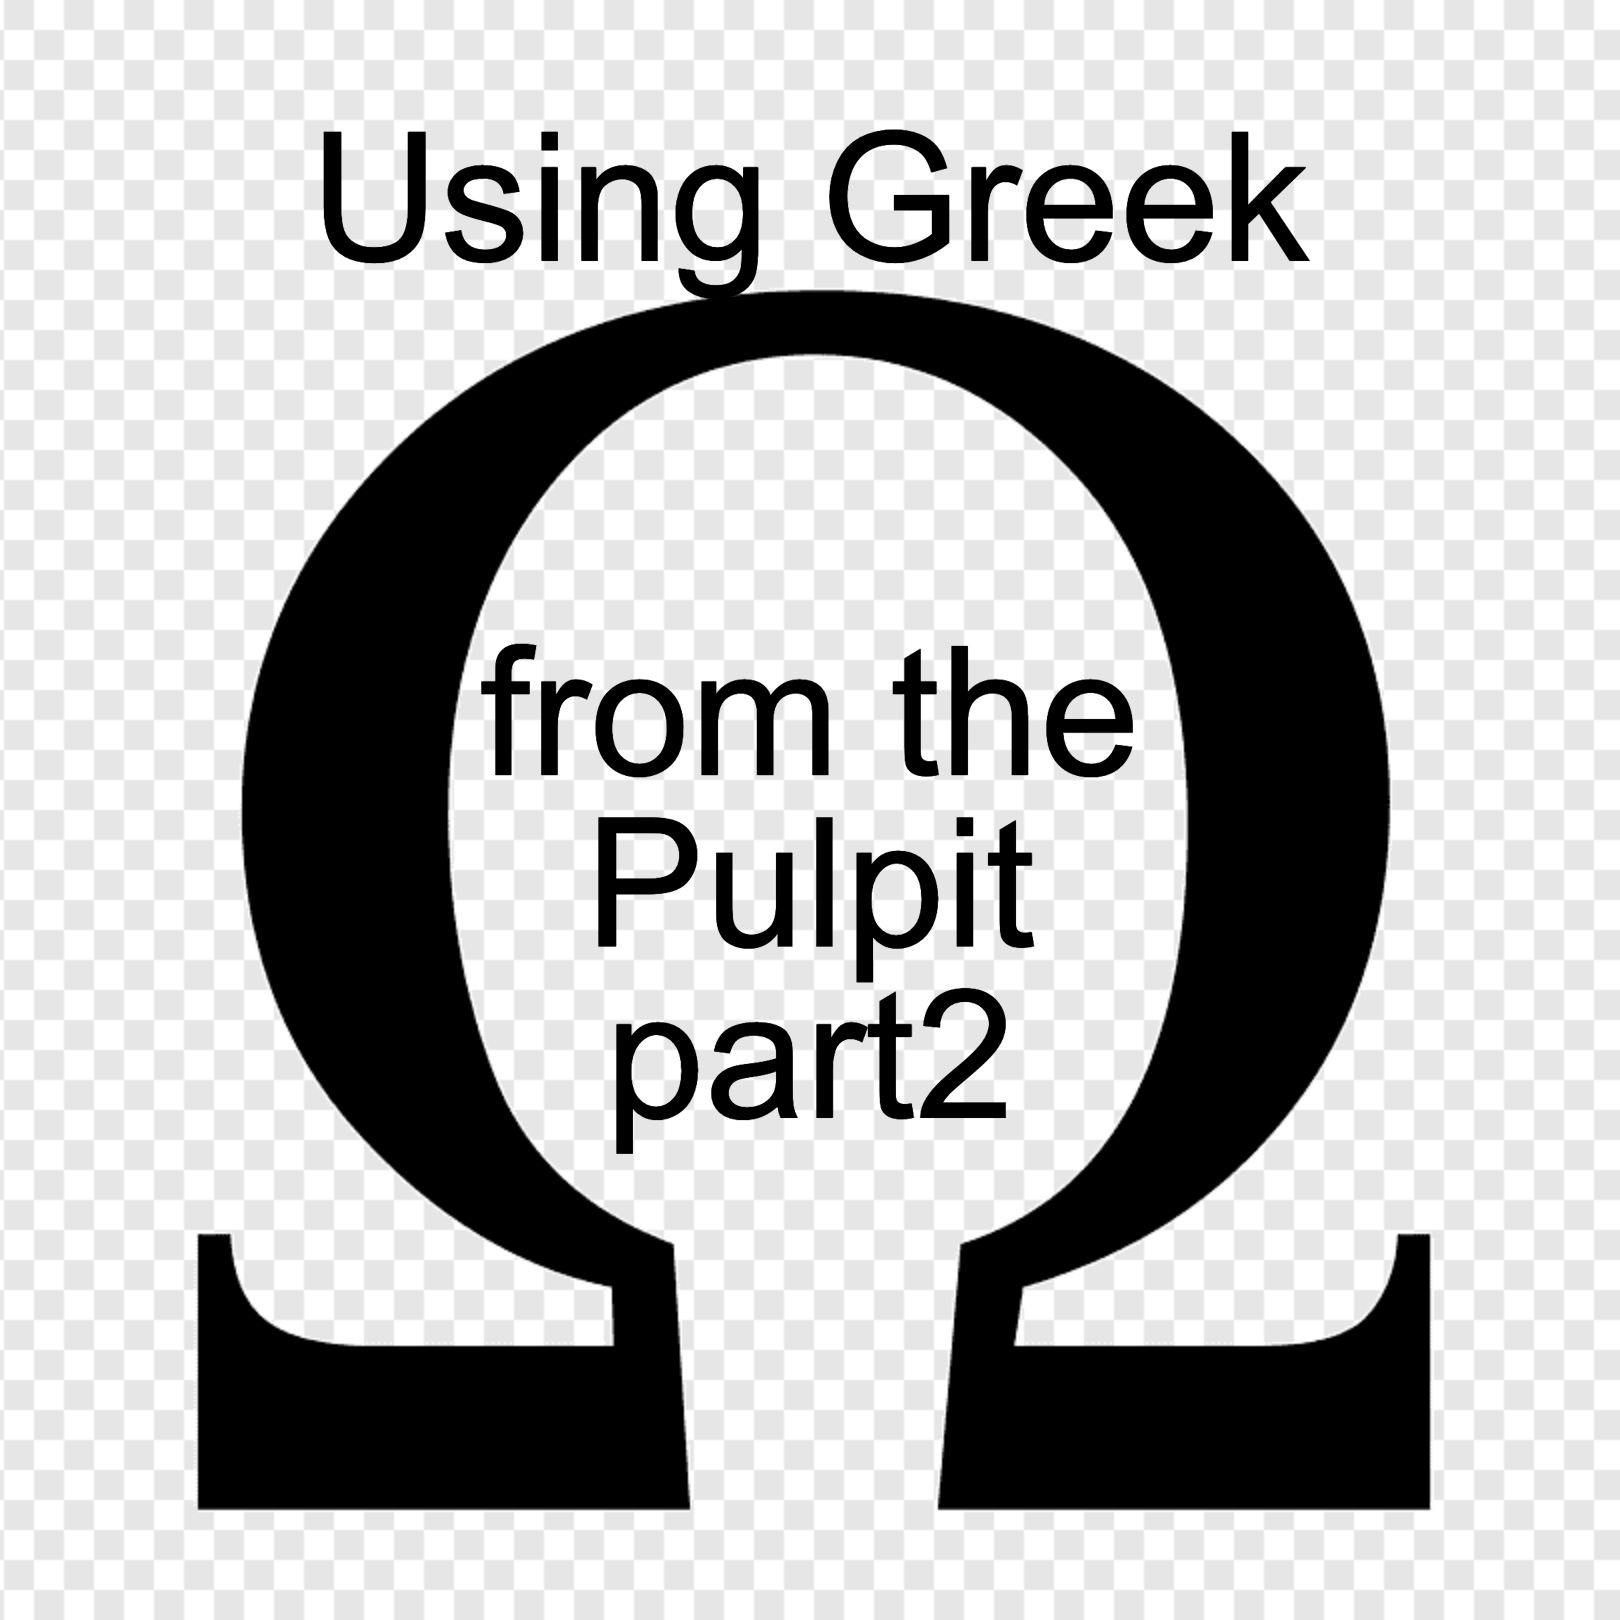 Using Greek from the Pulpit - part 2 of 2